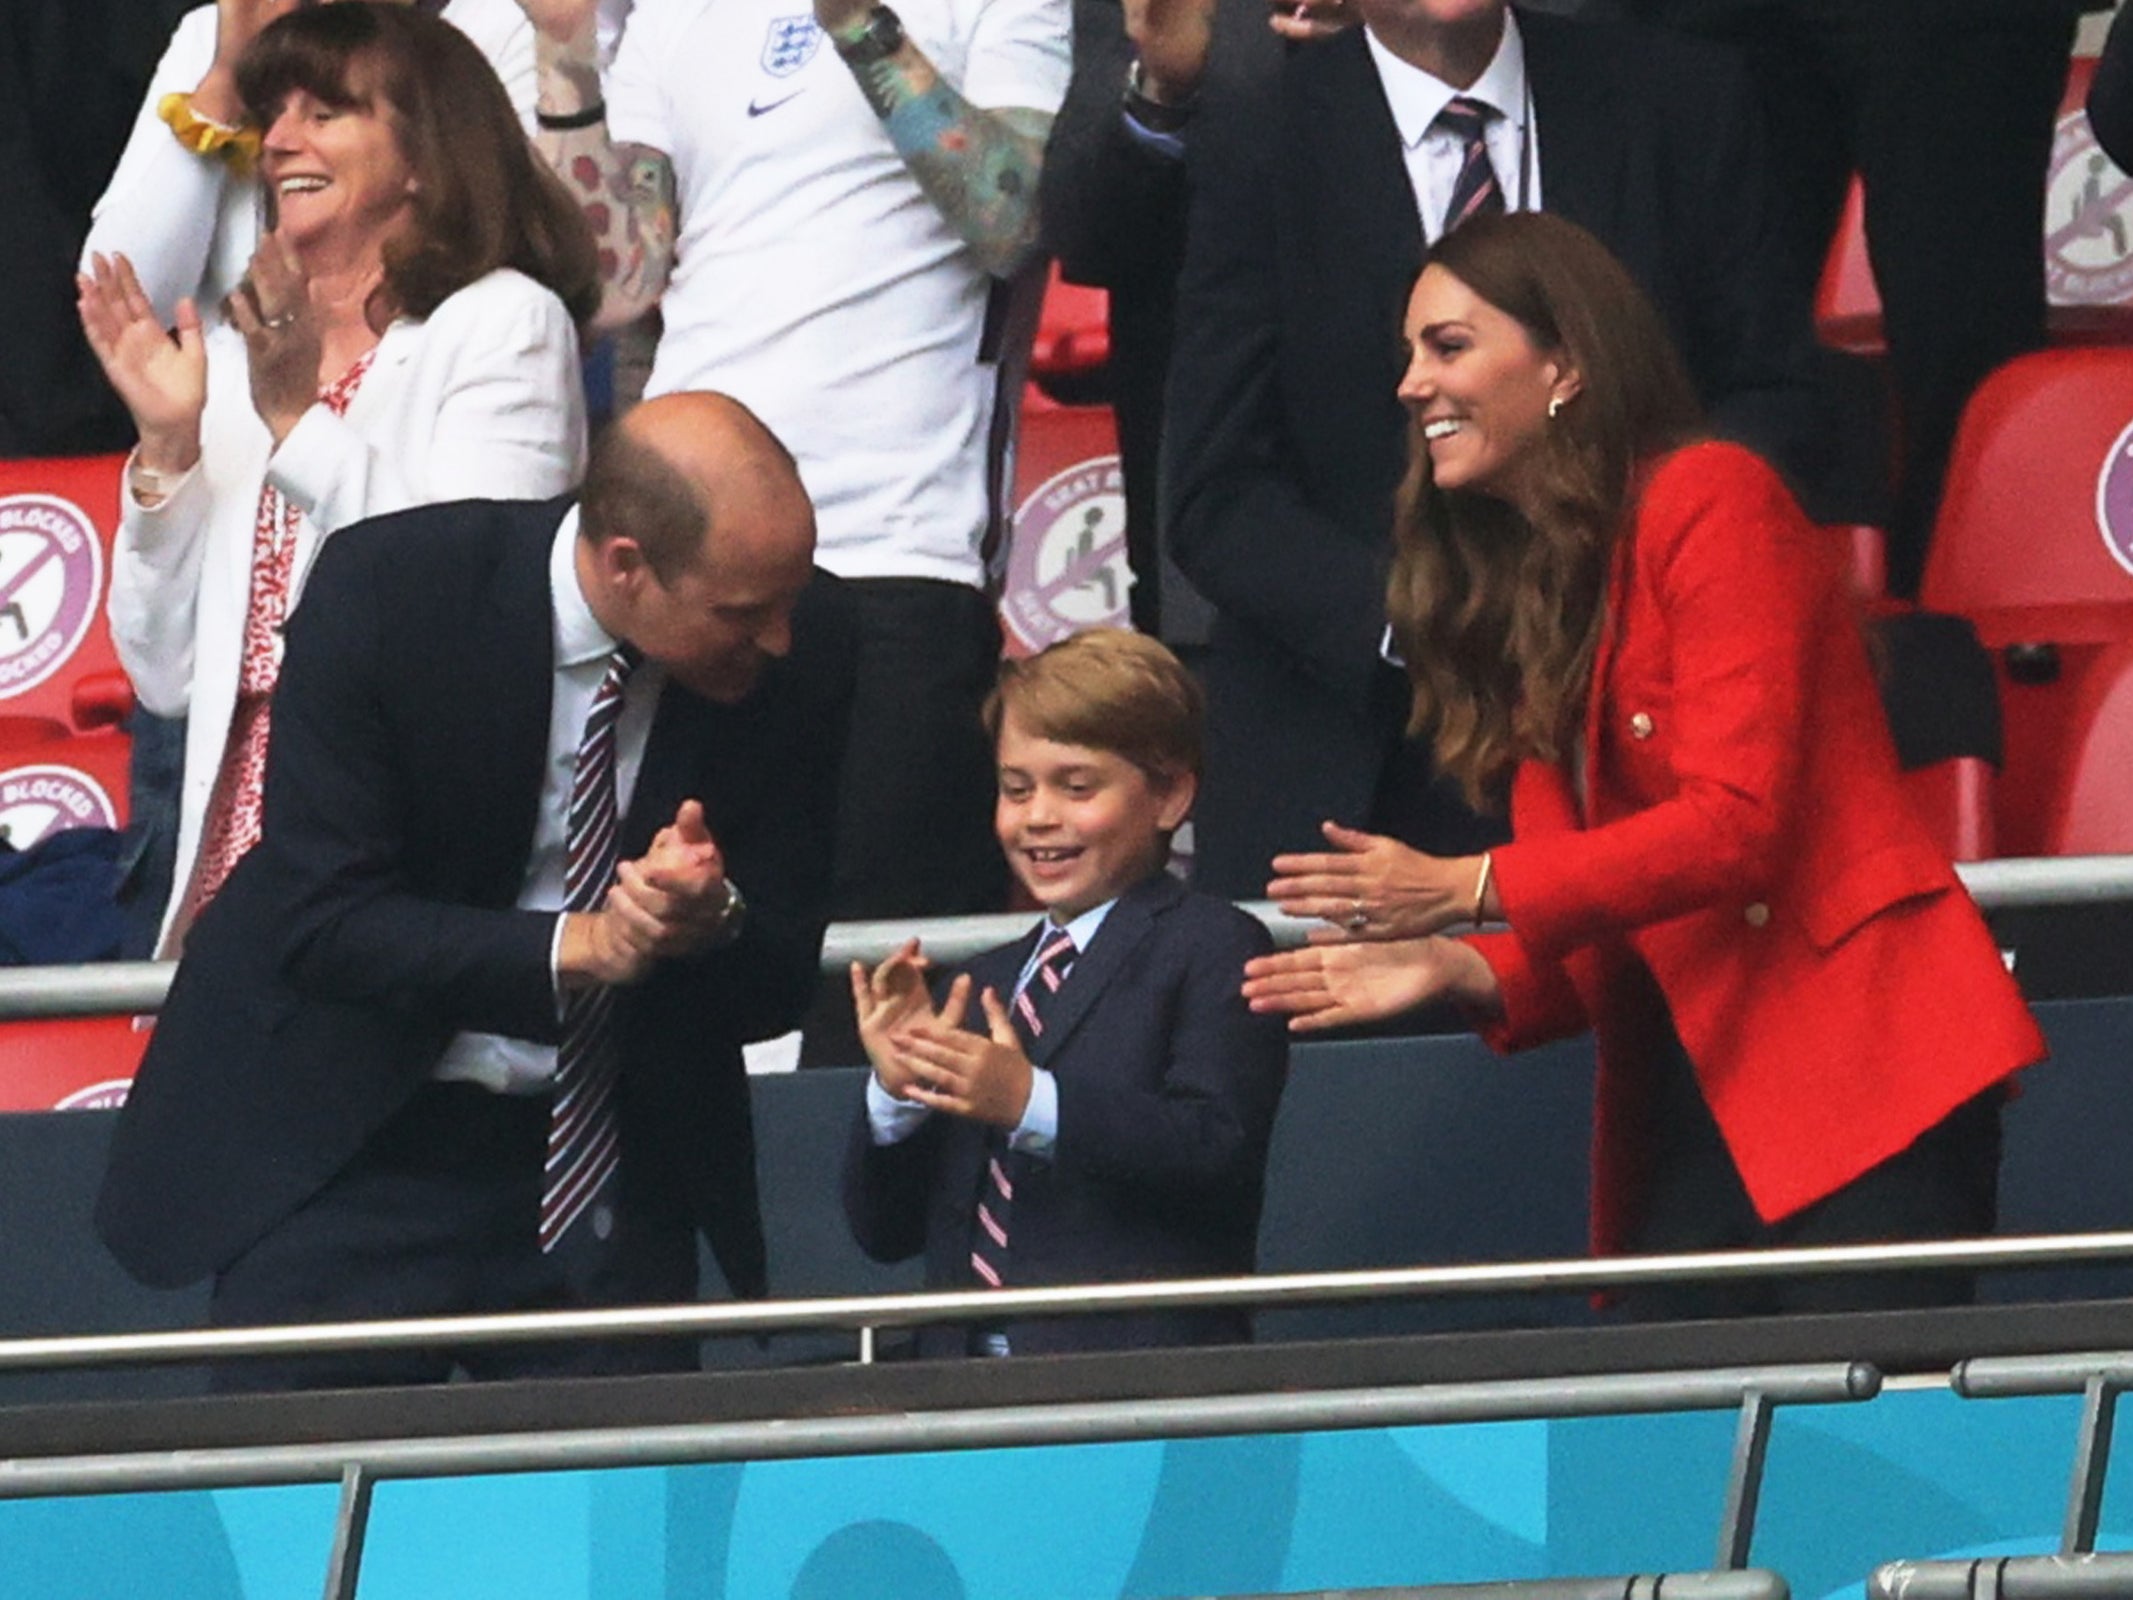 Prince George watched the game at Wembley Stadium with his parents